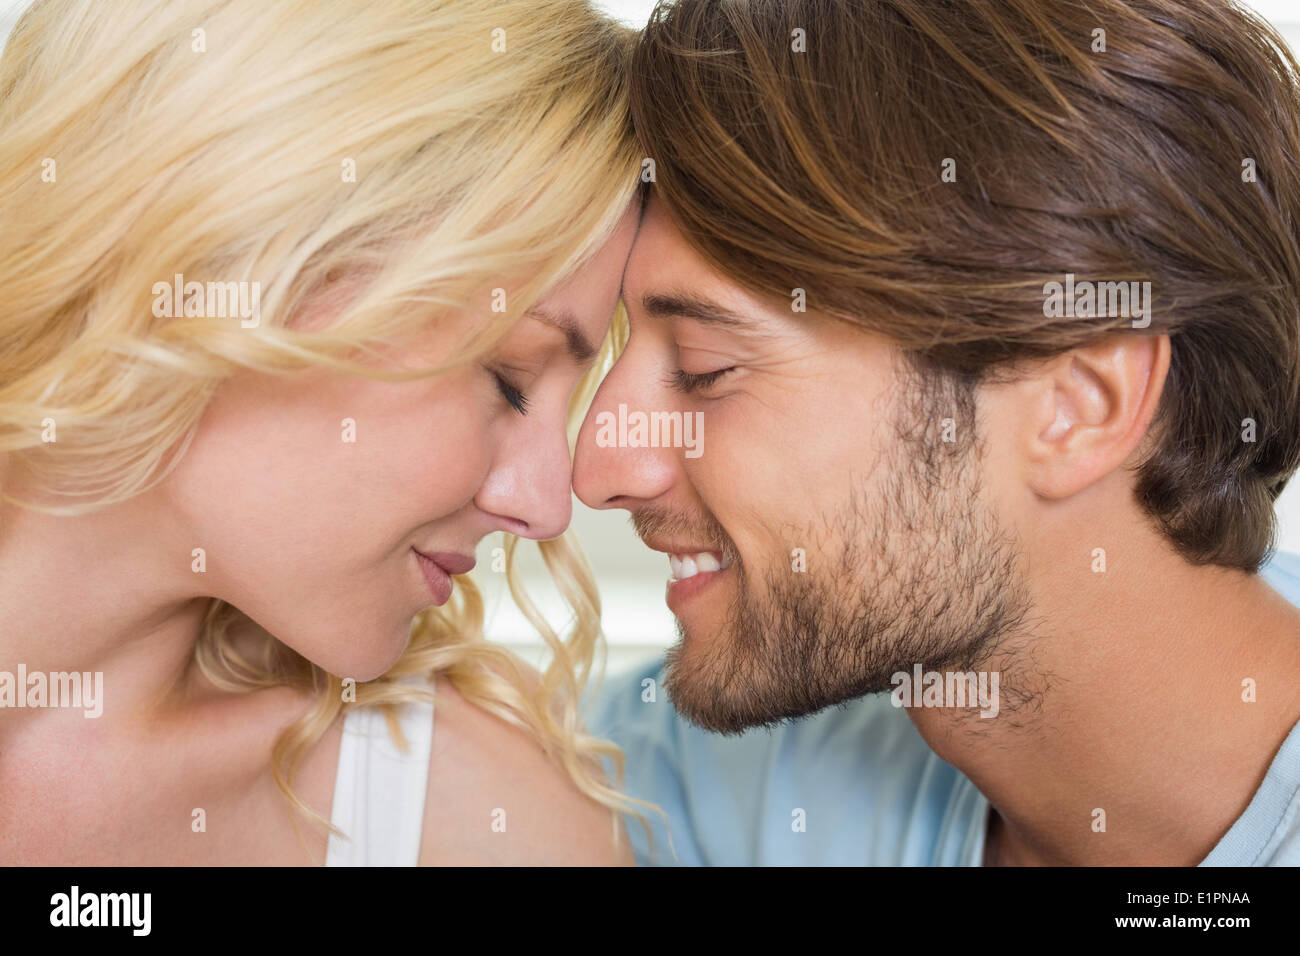 Cute couple facing each other with eyes closed Stock Photo